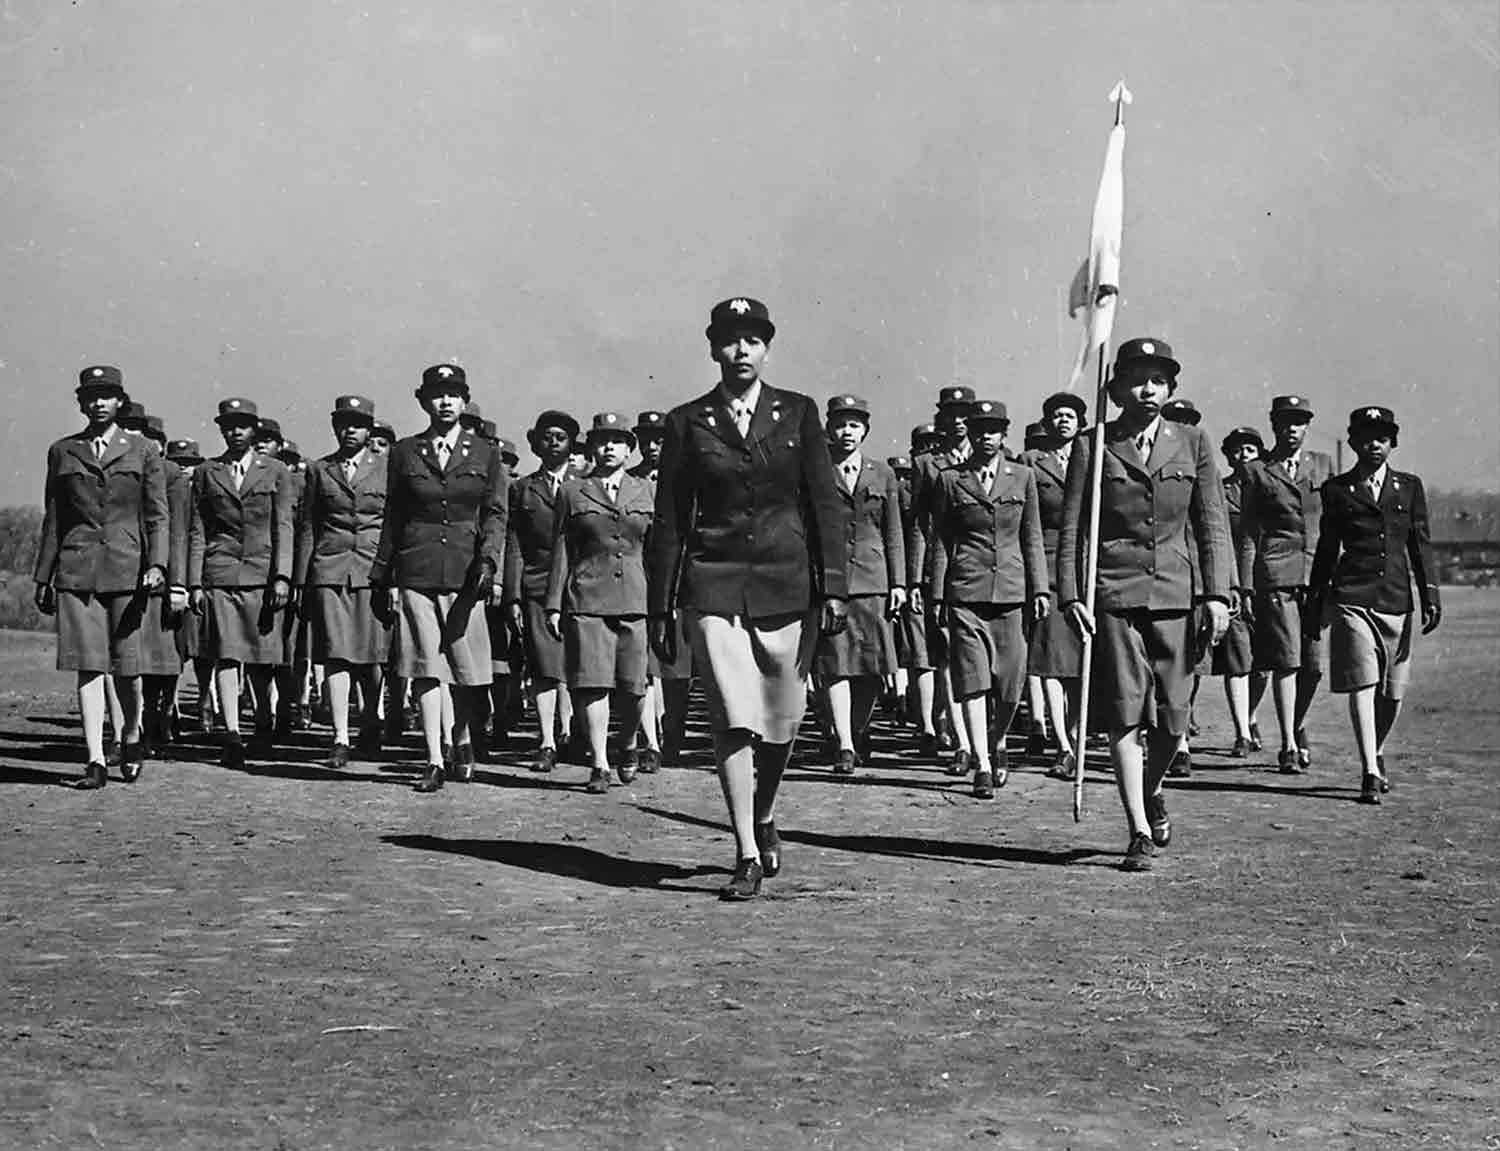 Captain Charity Earley Adams (front and center), who would later become Major Adams, drills her company at a training center in Fort Des Moines, Iowa, in 1943.